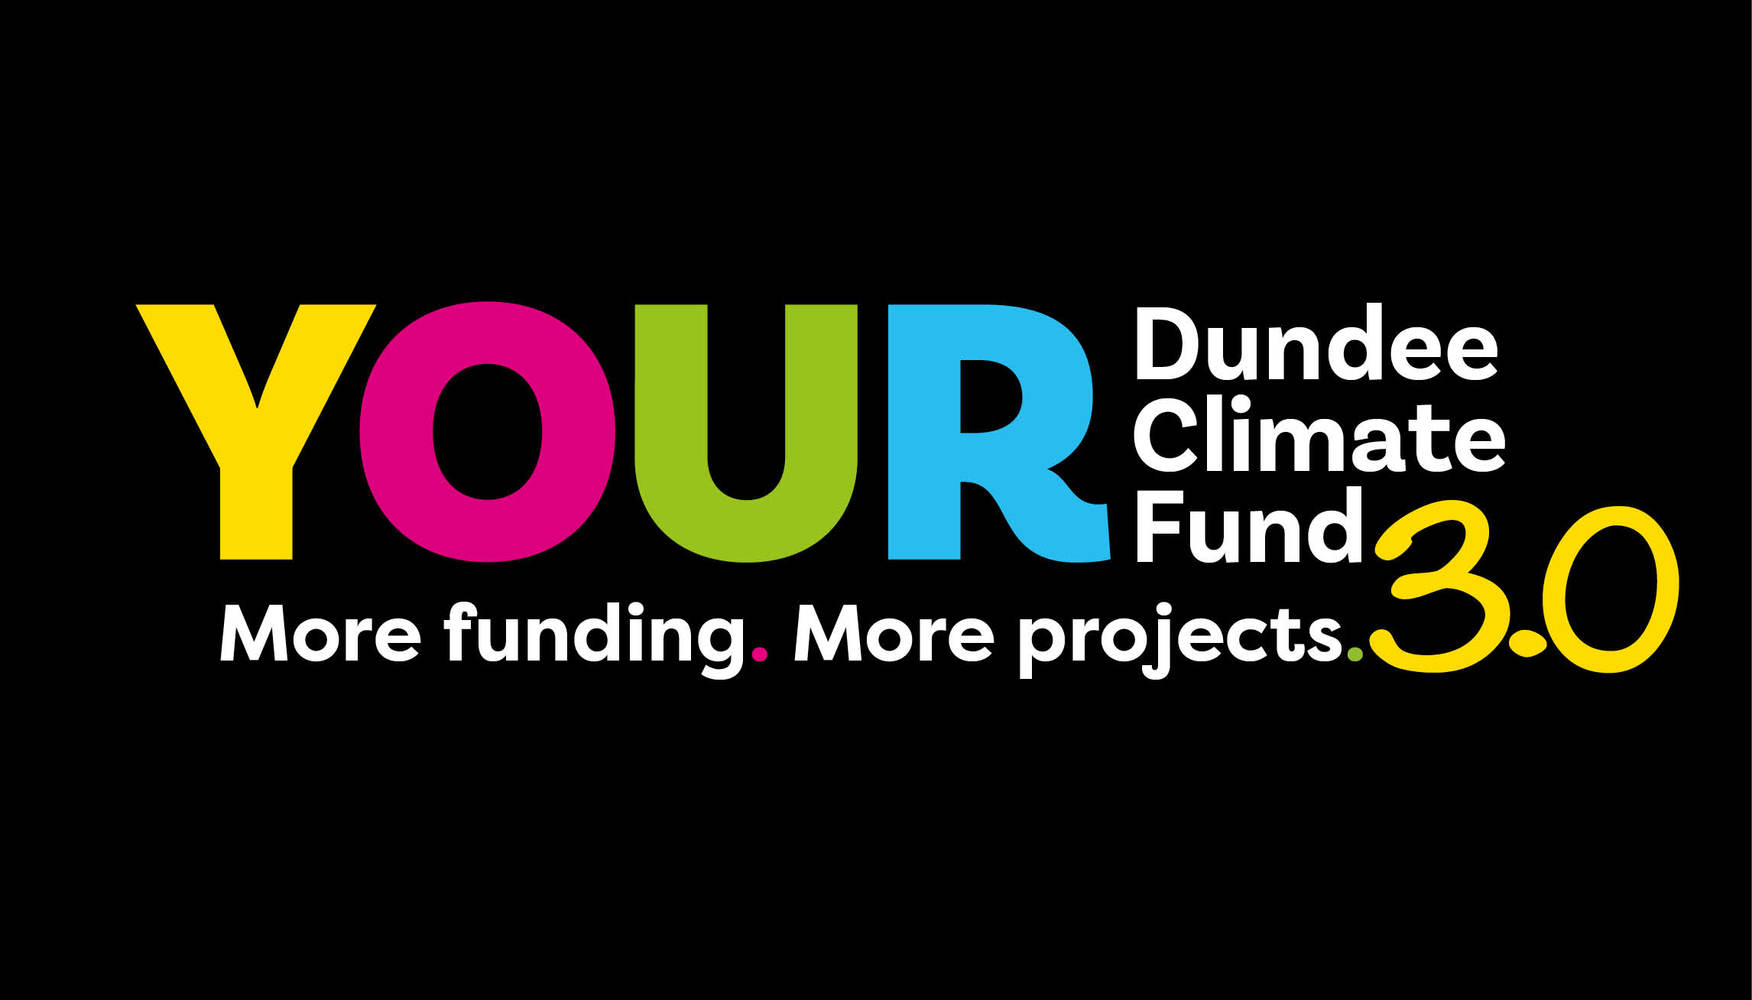 Dundee Climate Fund 3.0